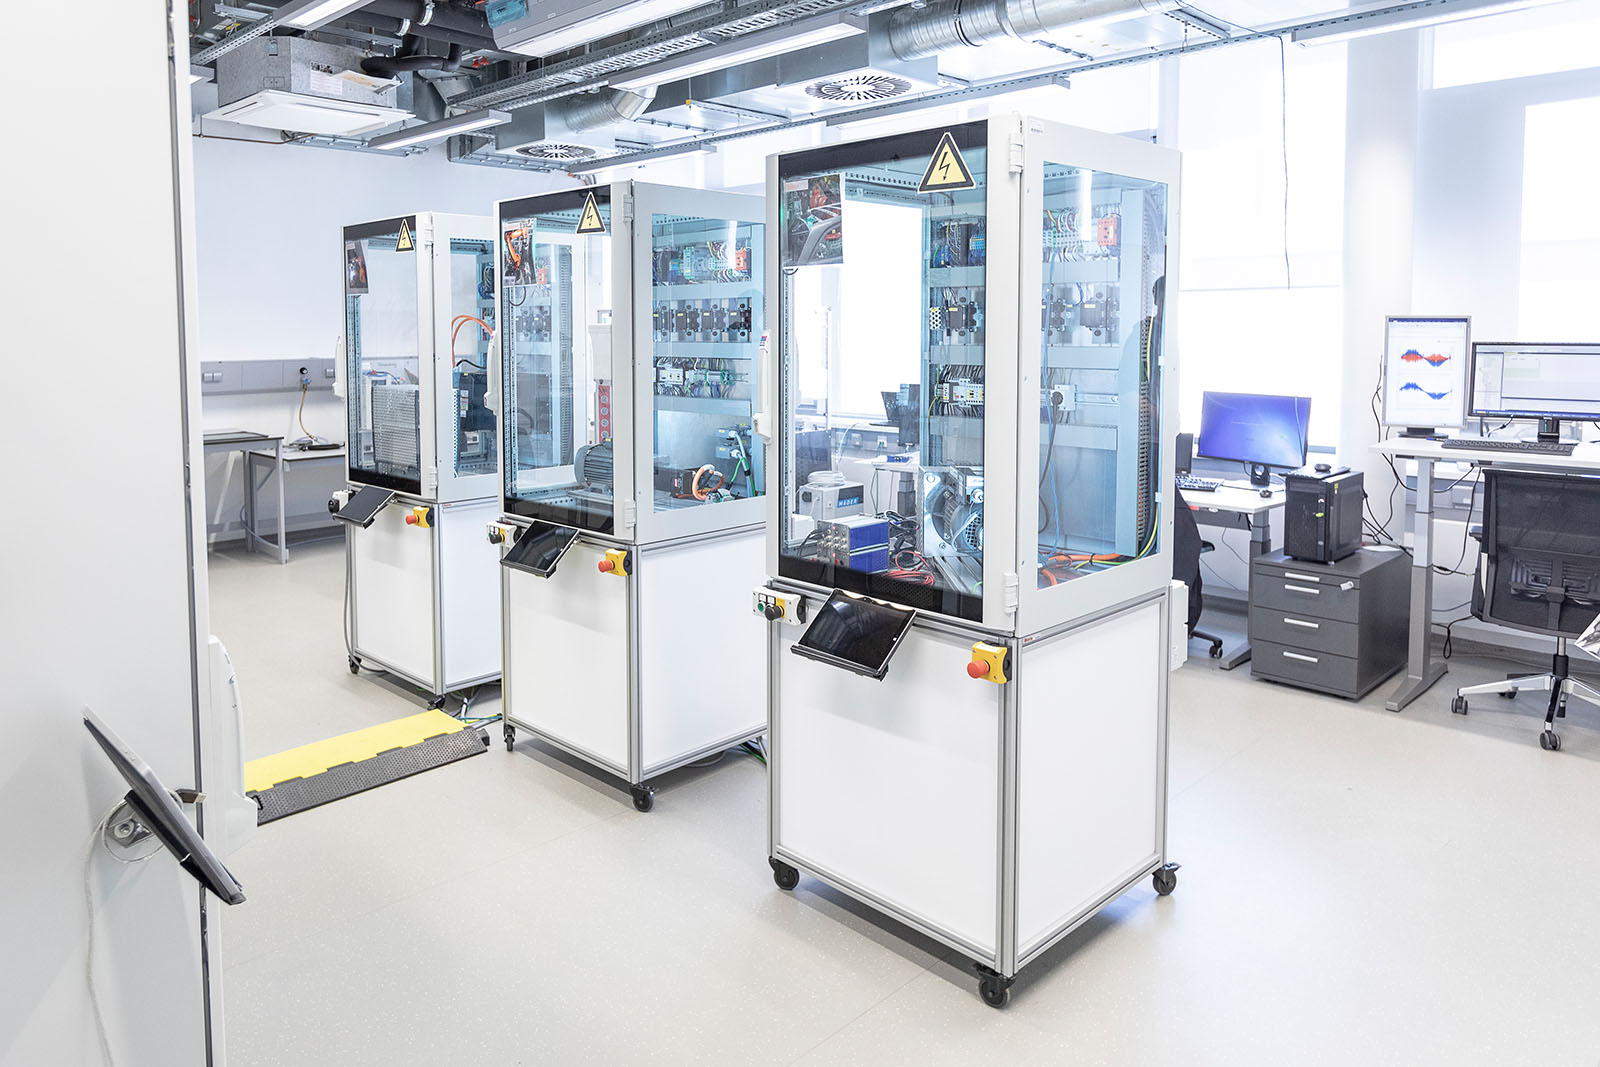 The DC Laboratory at Fraunhofer IPA tests components for converting production plants to direct current.